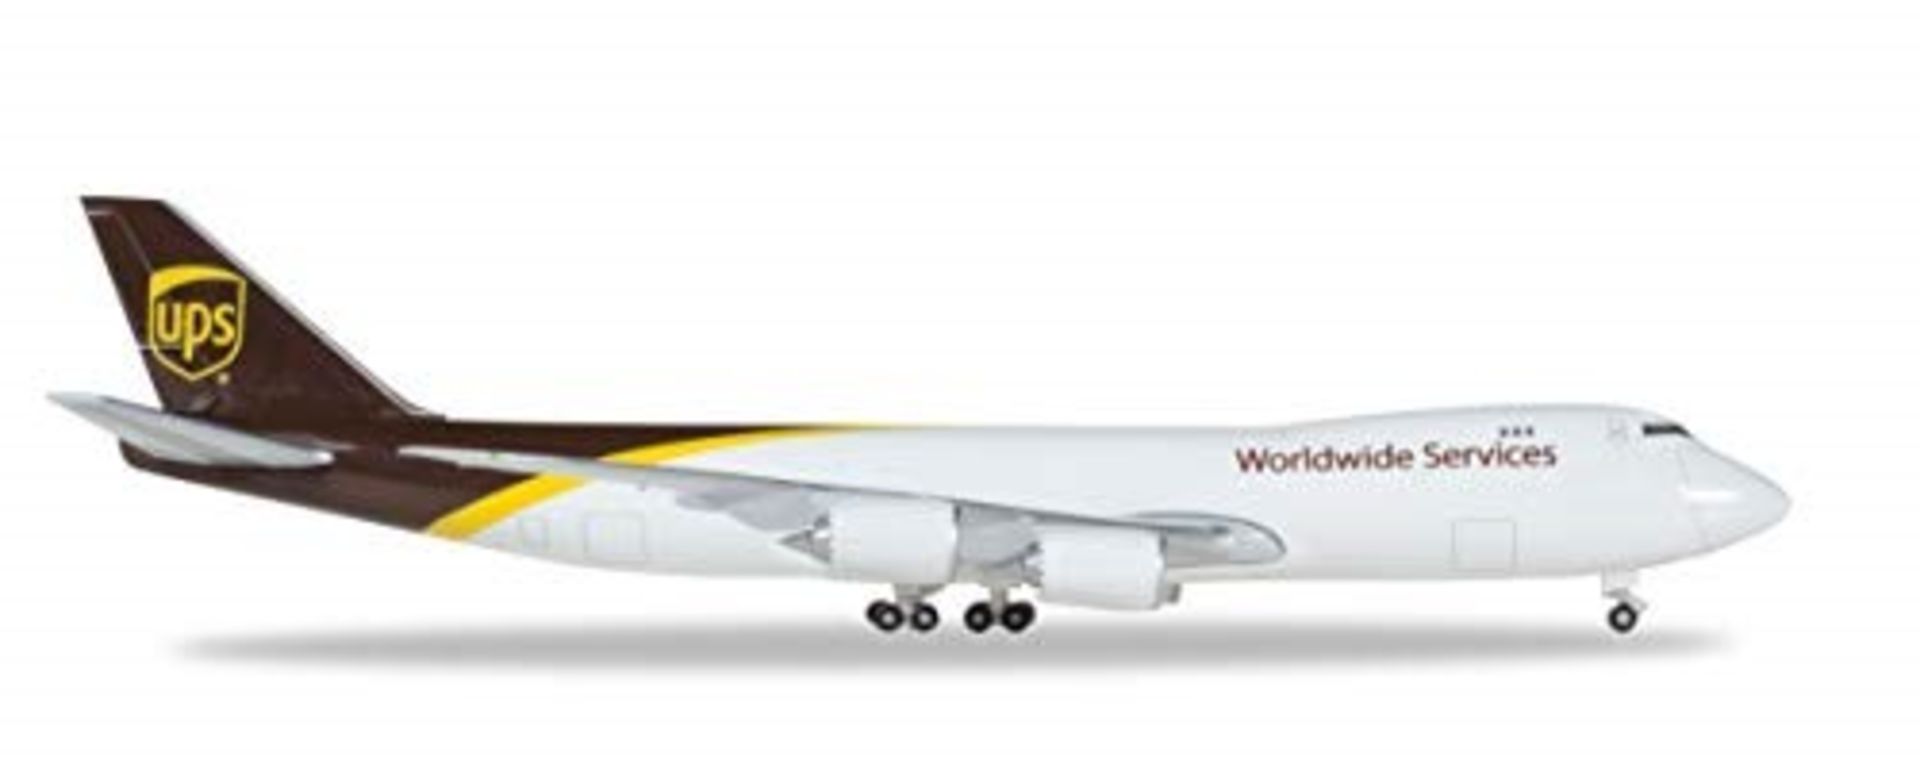 herpa 531023-001 UPS Airlines Boeing 747-8F-N607UP-Wings/Pickup Aircraft, Multicoloure